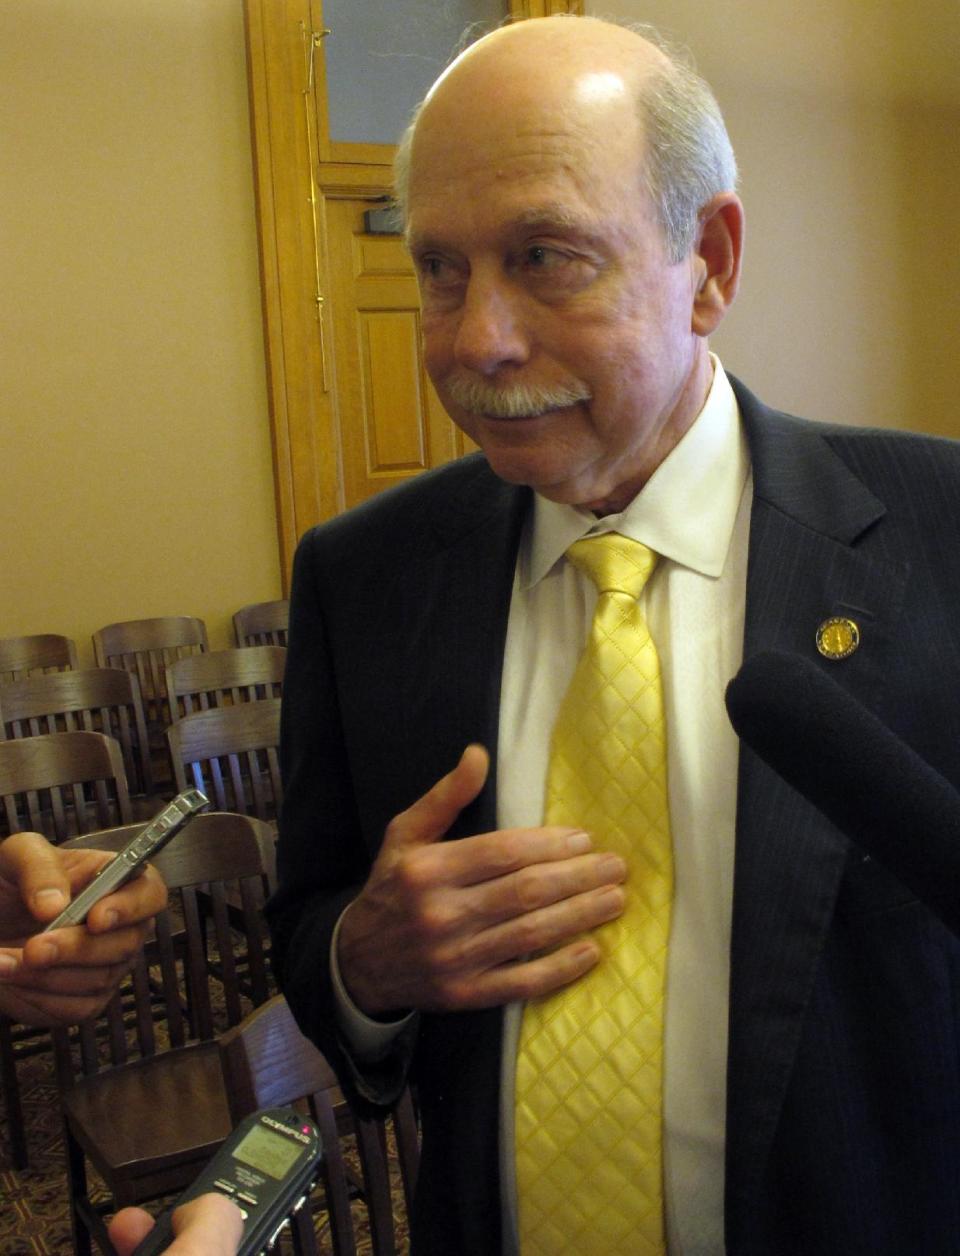 Kansas state Sen. Les Donovan, a Wichita Republican, answers questions from reporters during a break in negotiations with House members over tax cuts, Tuesday, May 15, 2012, at the Statehouse in Topeka, Kan. (AP Photo/John Hanna)